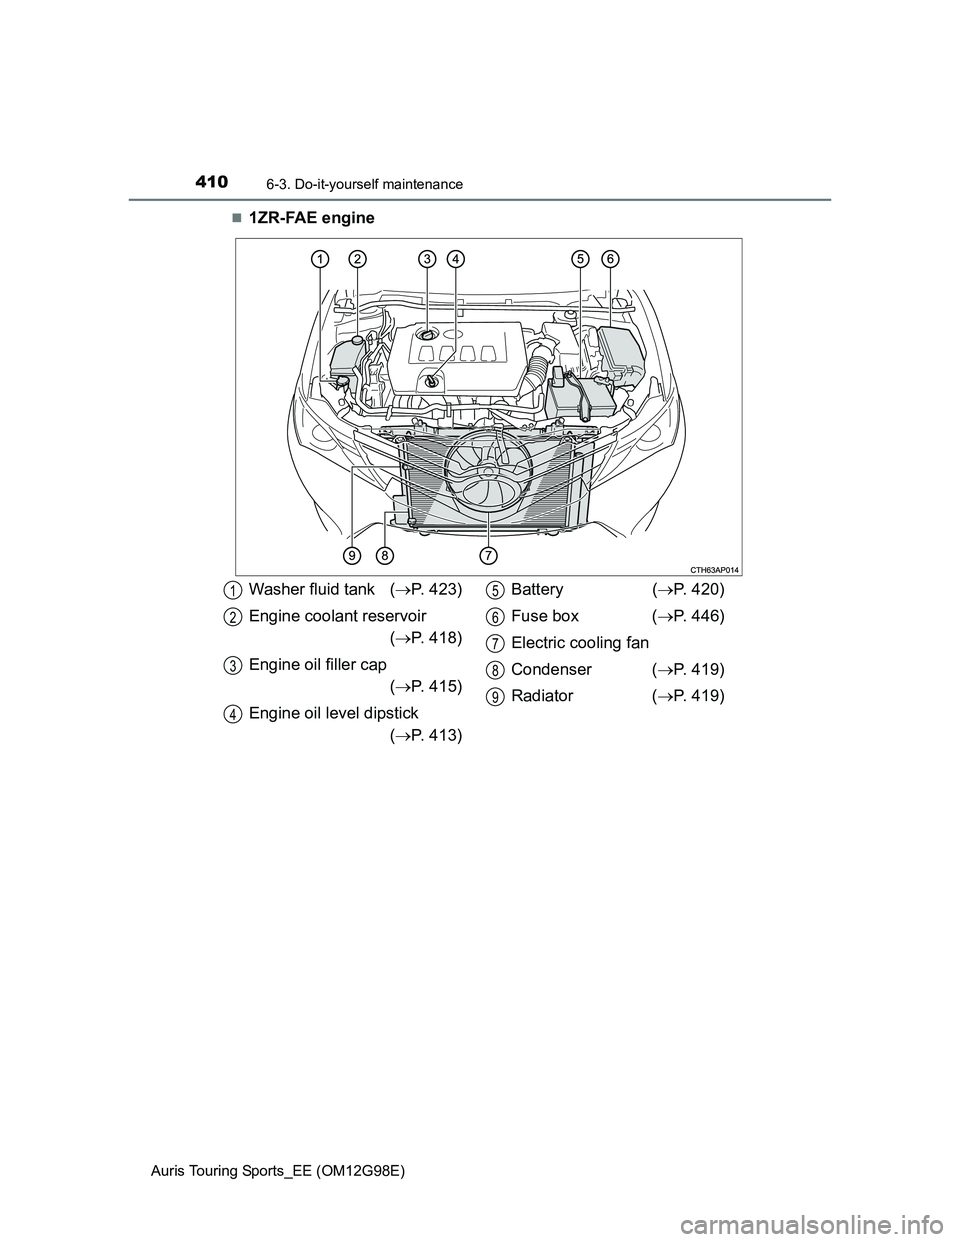 TOYOTA AURIS 2015  Owners Manual (in English) 4106-3. Do-it-yourself maintenance
Auris Touring Sports_EE (OM12G98E)
1ZR-FAE engine
Washer fluid tank (P. 423)
Engine coolant reservoir
(P. 418)
Engine oil filler cap
(P. 415)
Engine oil 